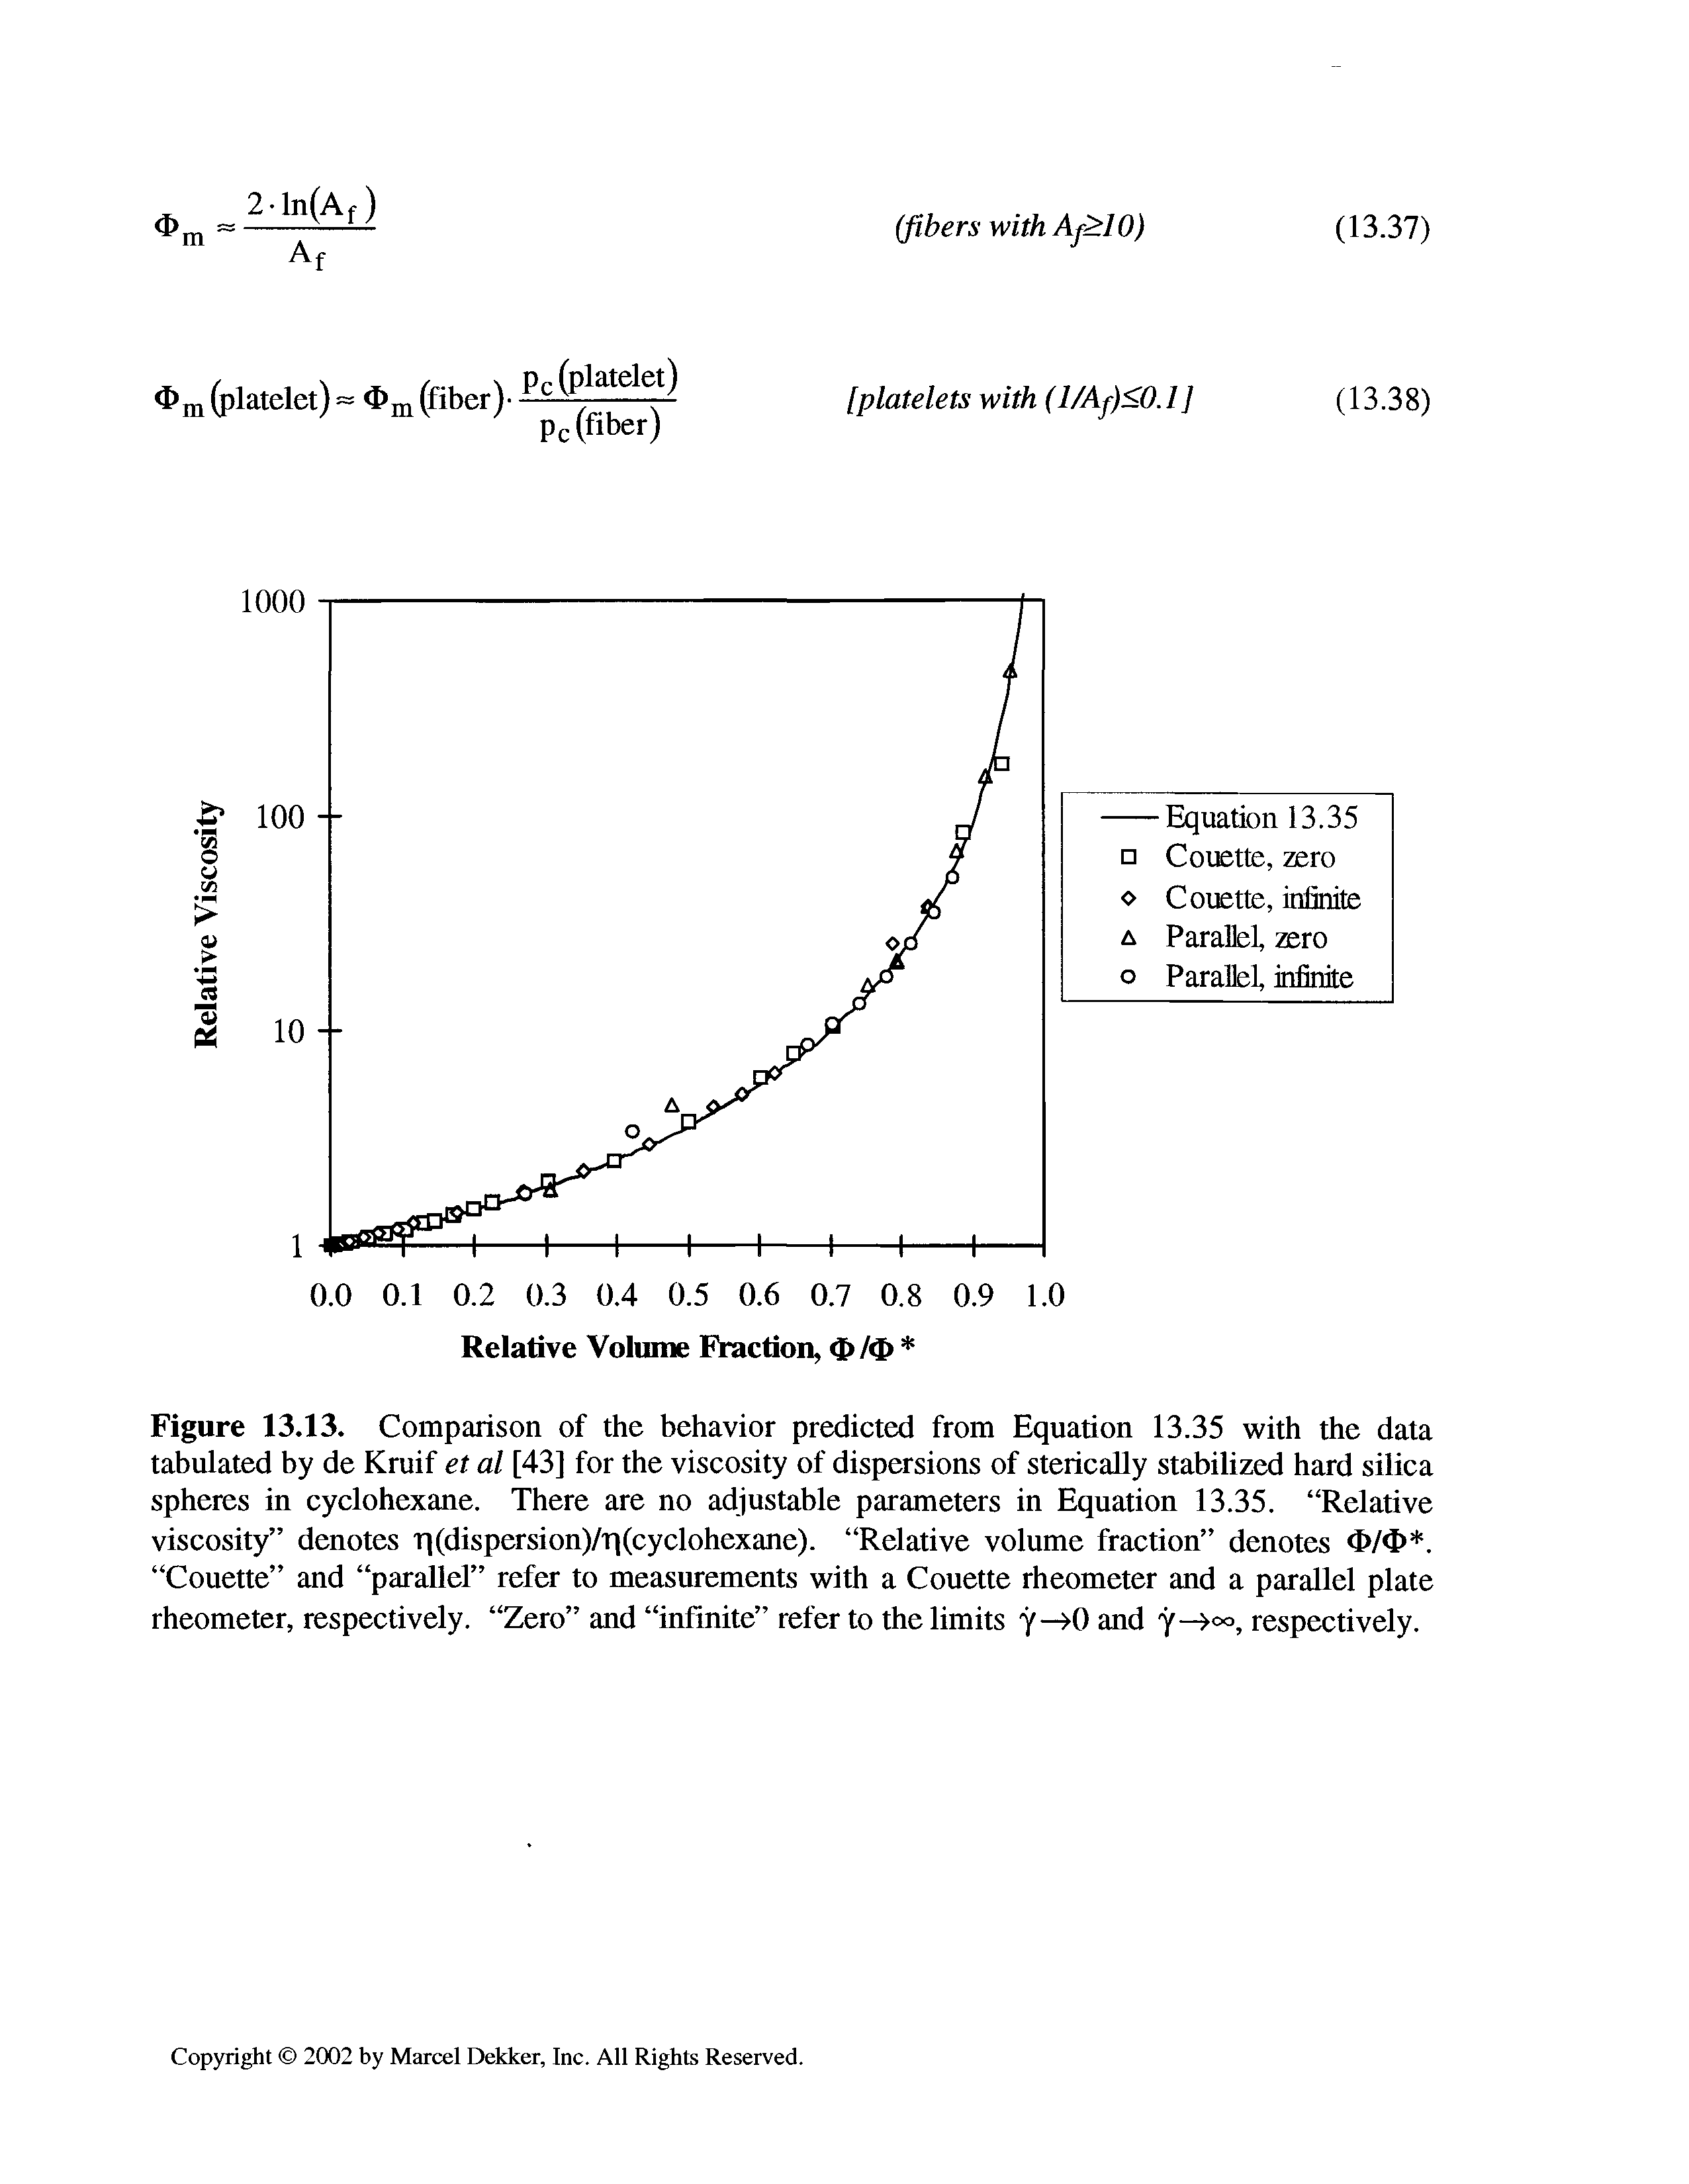 Figure 13.13. Comparison of the behavior predicted from Equation 13.35 with the data tabulated by de Kruif et al [43] for the viscosity of dispersions of sterically stabilized hard silica spheres in cyclohexane. There are no adjustable parameters in Equation 13.35. Relative viscosity denotes r (dispersion)/r (cyclohexane). Relative volume fraction denotes 0/0. Couette and parallel refer to measurements with a Couette rheometer and a parallel plate rheometer, respectively. Zero and infinite refer to the limits y —>0 and y- < >, respectively.